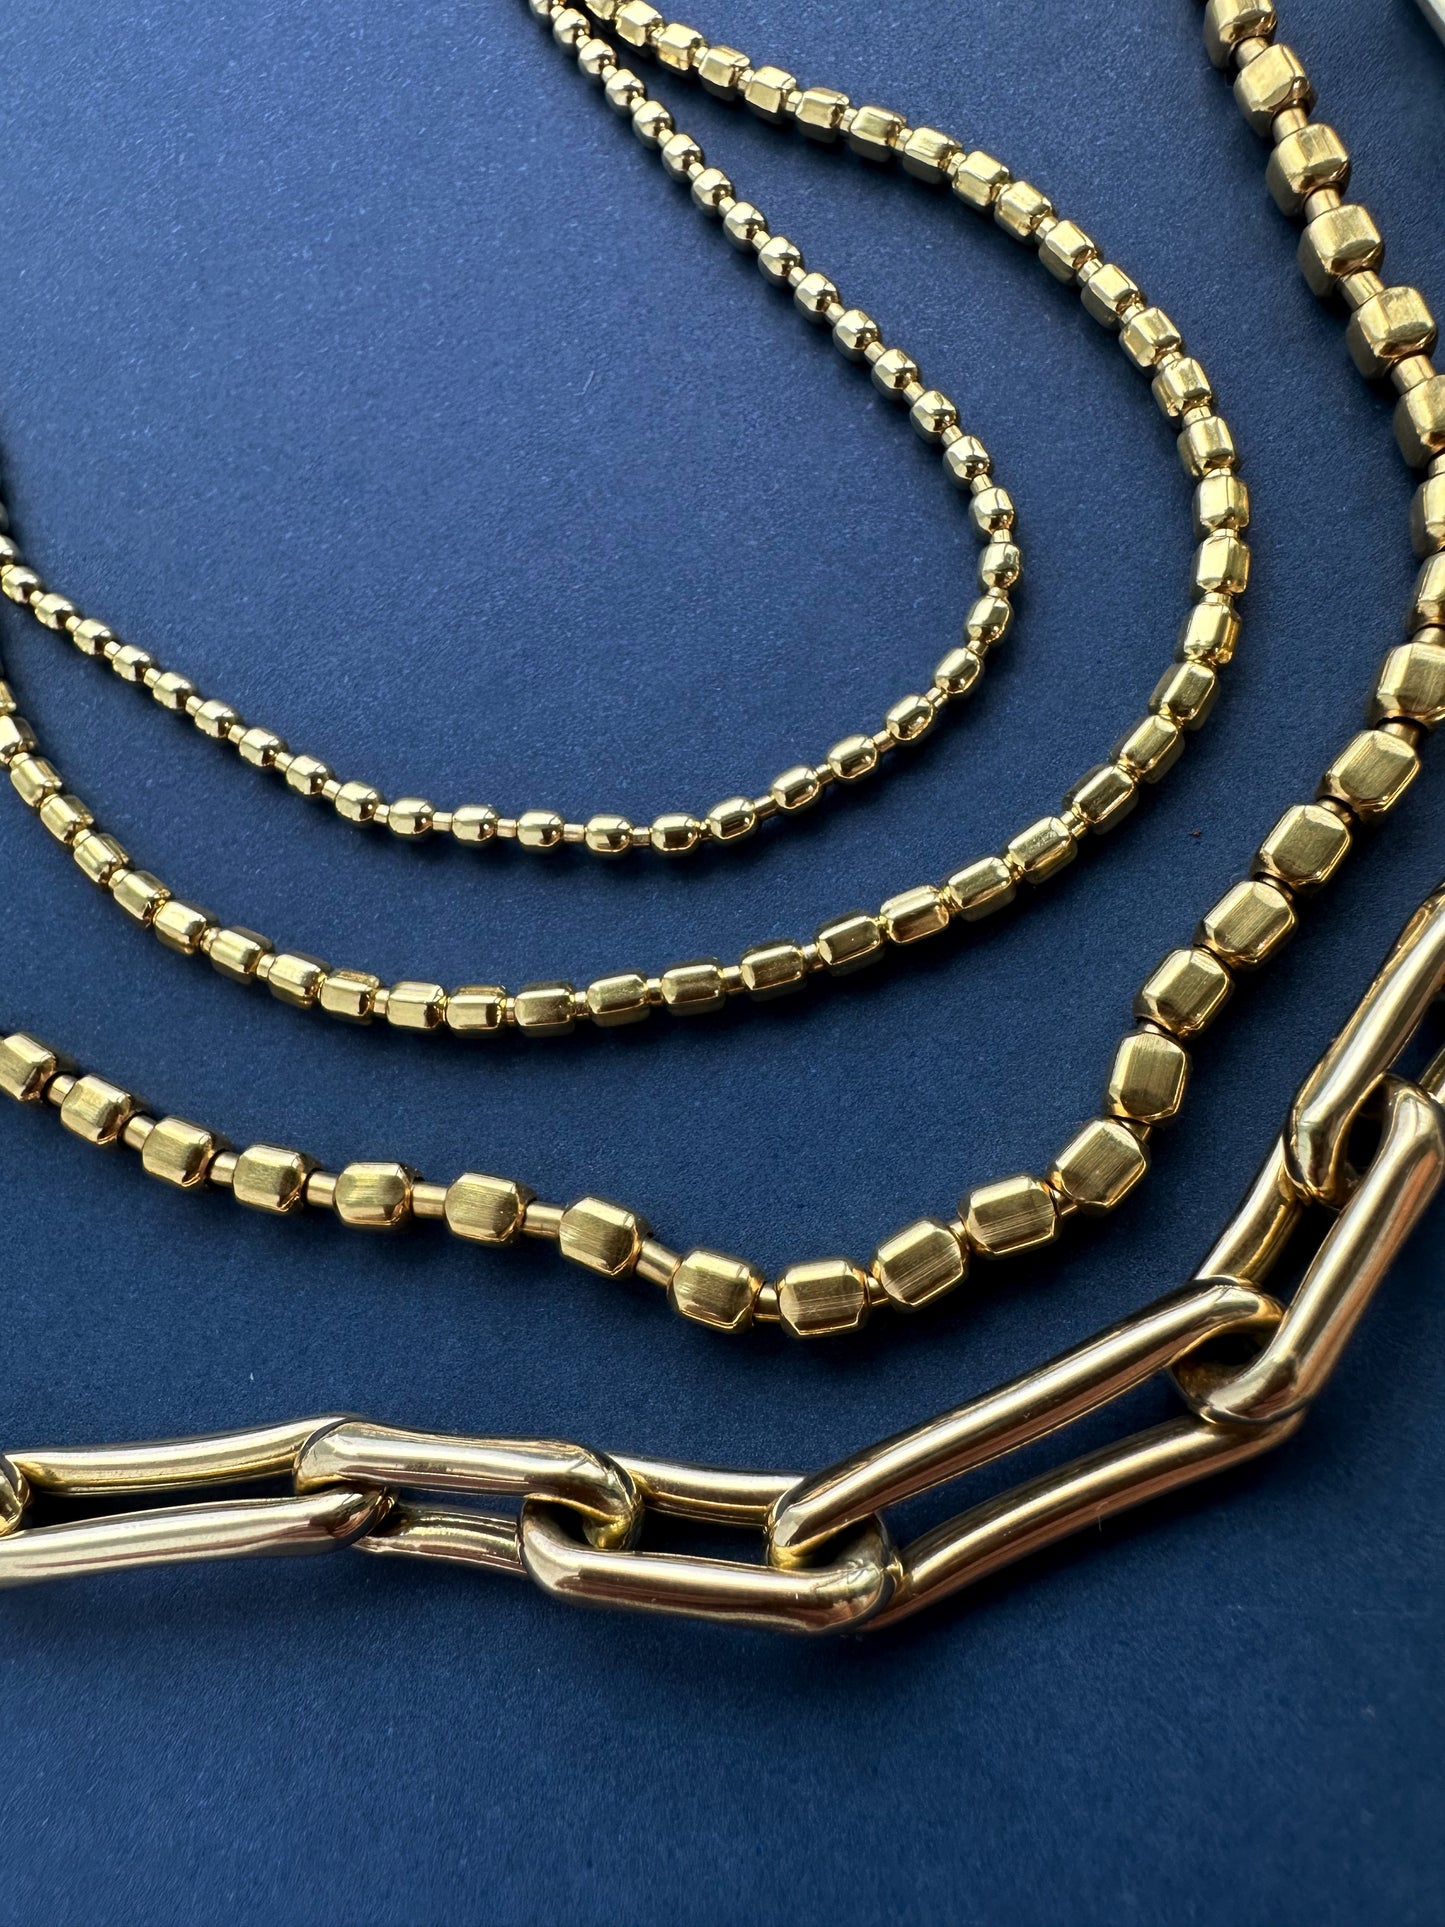 Deluxe layer Nugget Chain XL - 16"